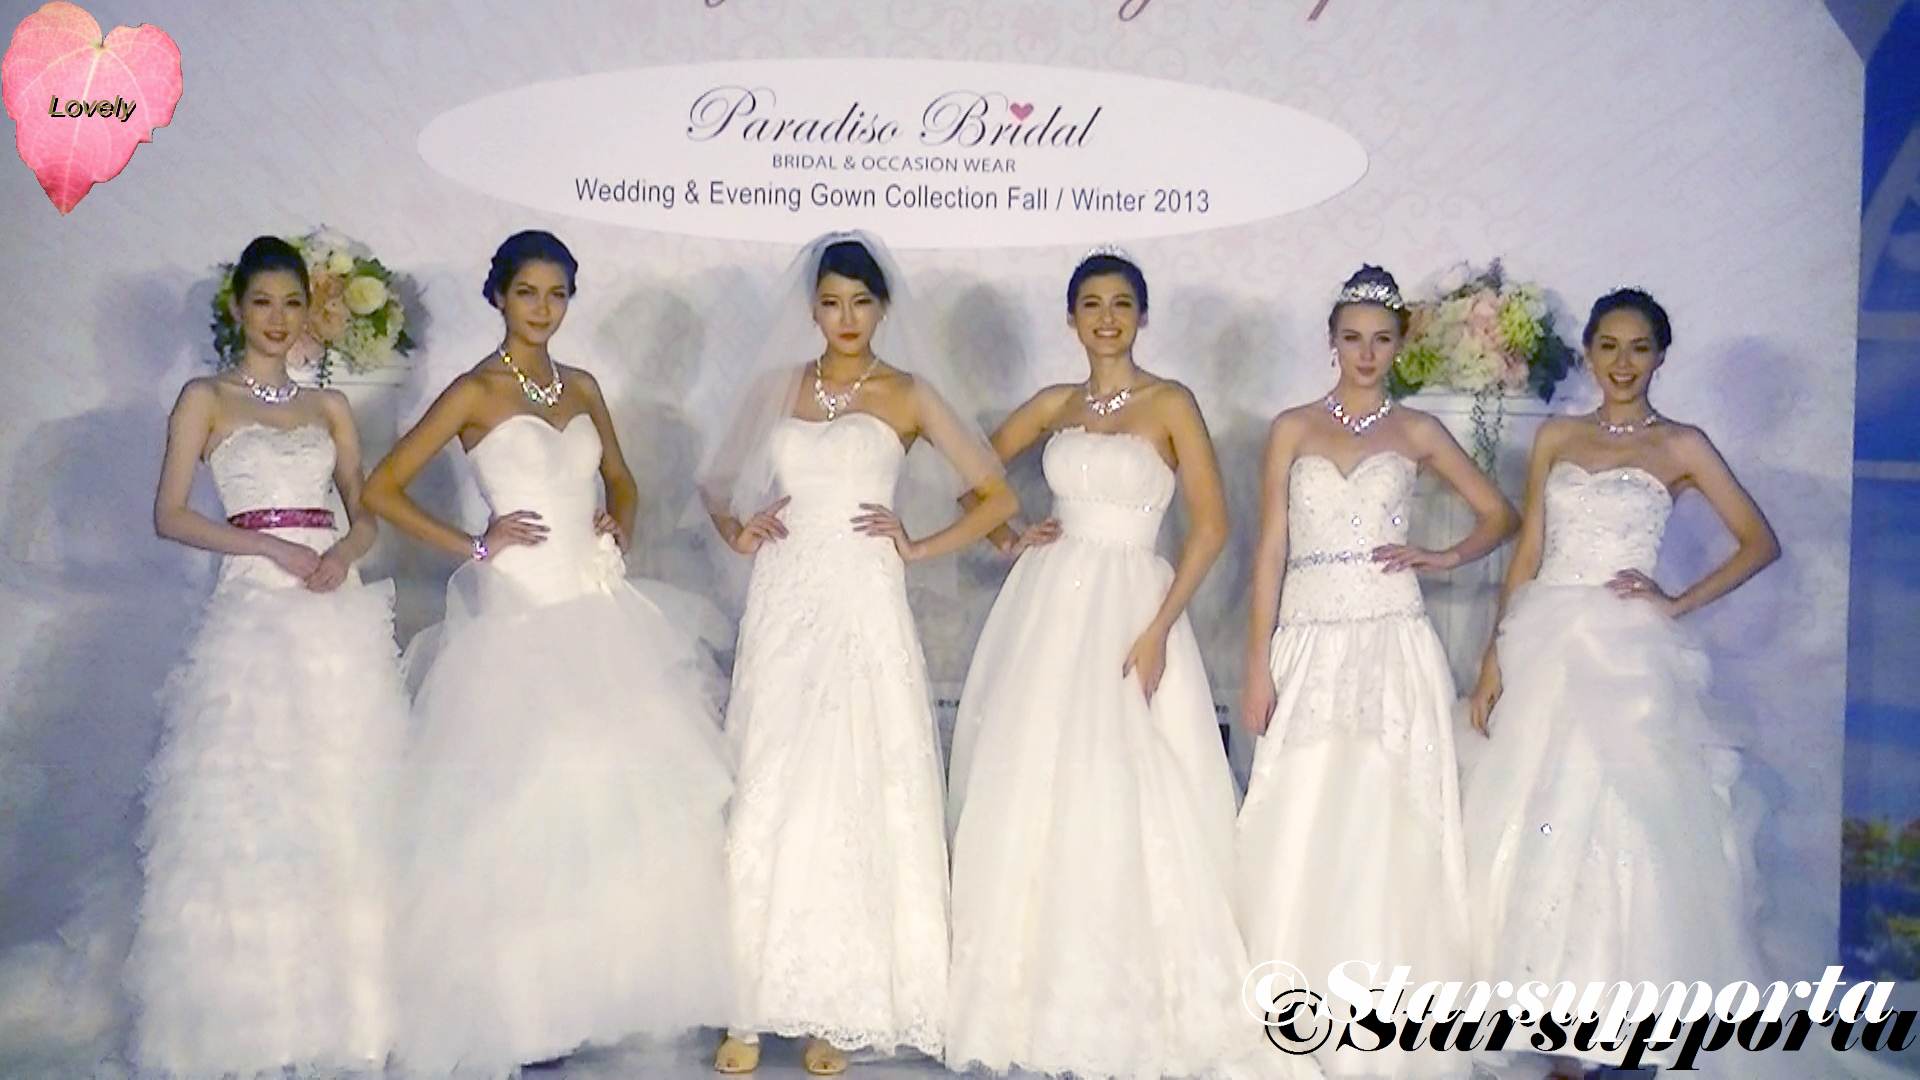 20121104 Hong Kong Wedding Expo - Paradiso Bridal:Wedding & Evening Gown Collection Fall or Winter 2013 @ 香港會議展覽中心 HKCEC (video)